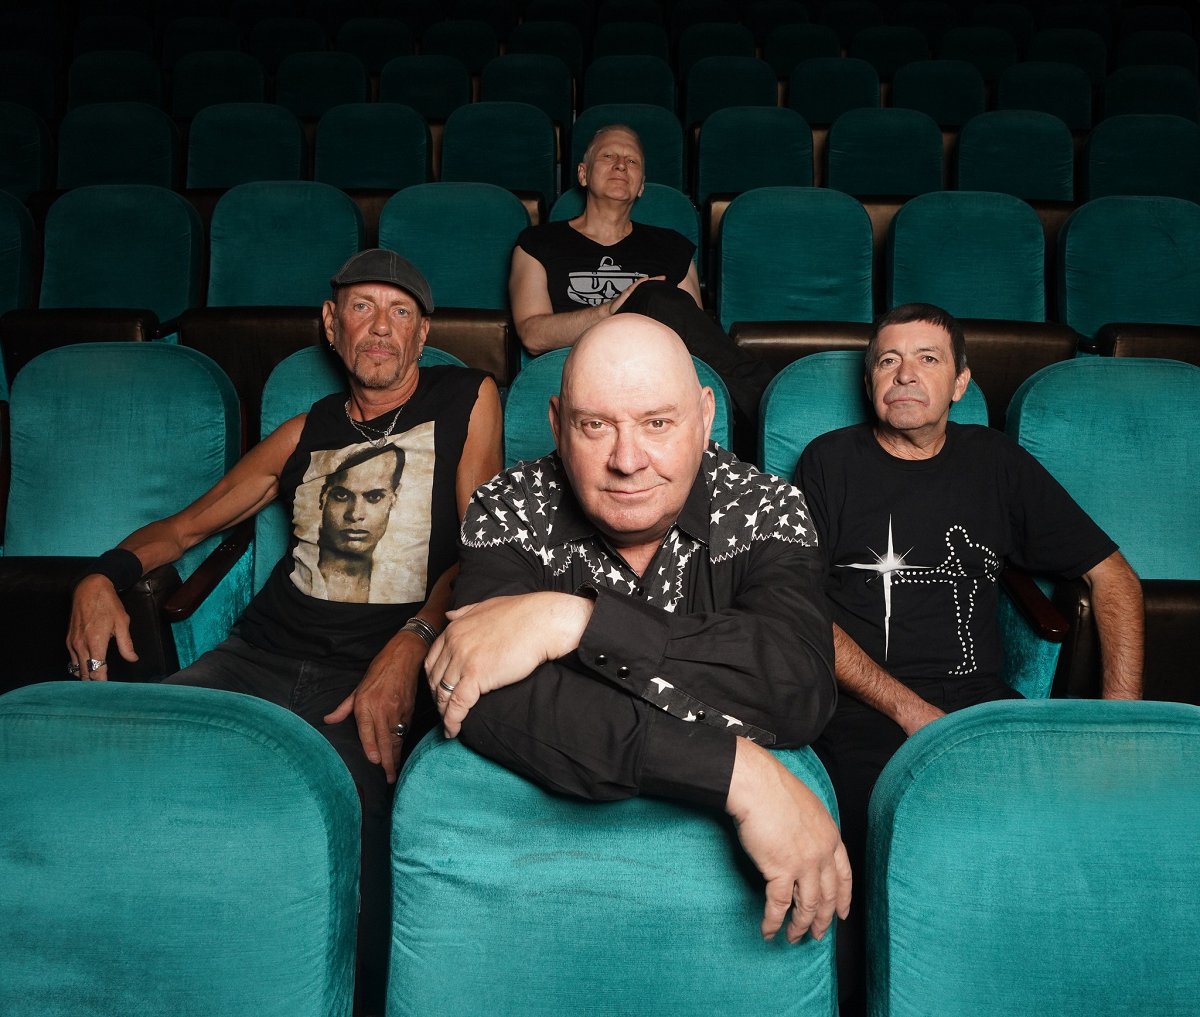 Contest: Win a pair of tickets to see Stiff Little Fingers live on Wednesday, May 22, at the Fonda Theatre on their farewell tour!

Ricky Warwick will be opening the show.

Enter our ticket giveaway now: bit.ly/3UXs6i2

#stifflittlefingers #fondatheatre #giveawayalert